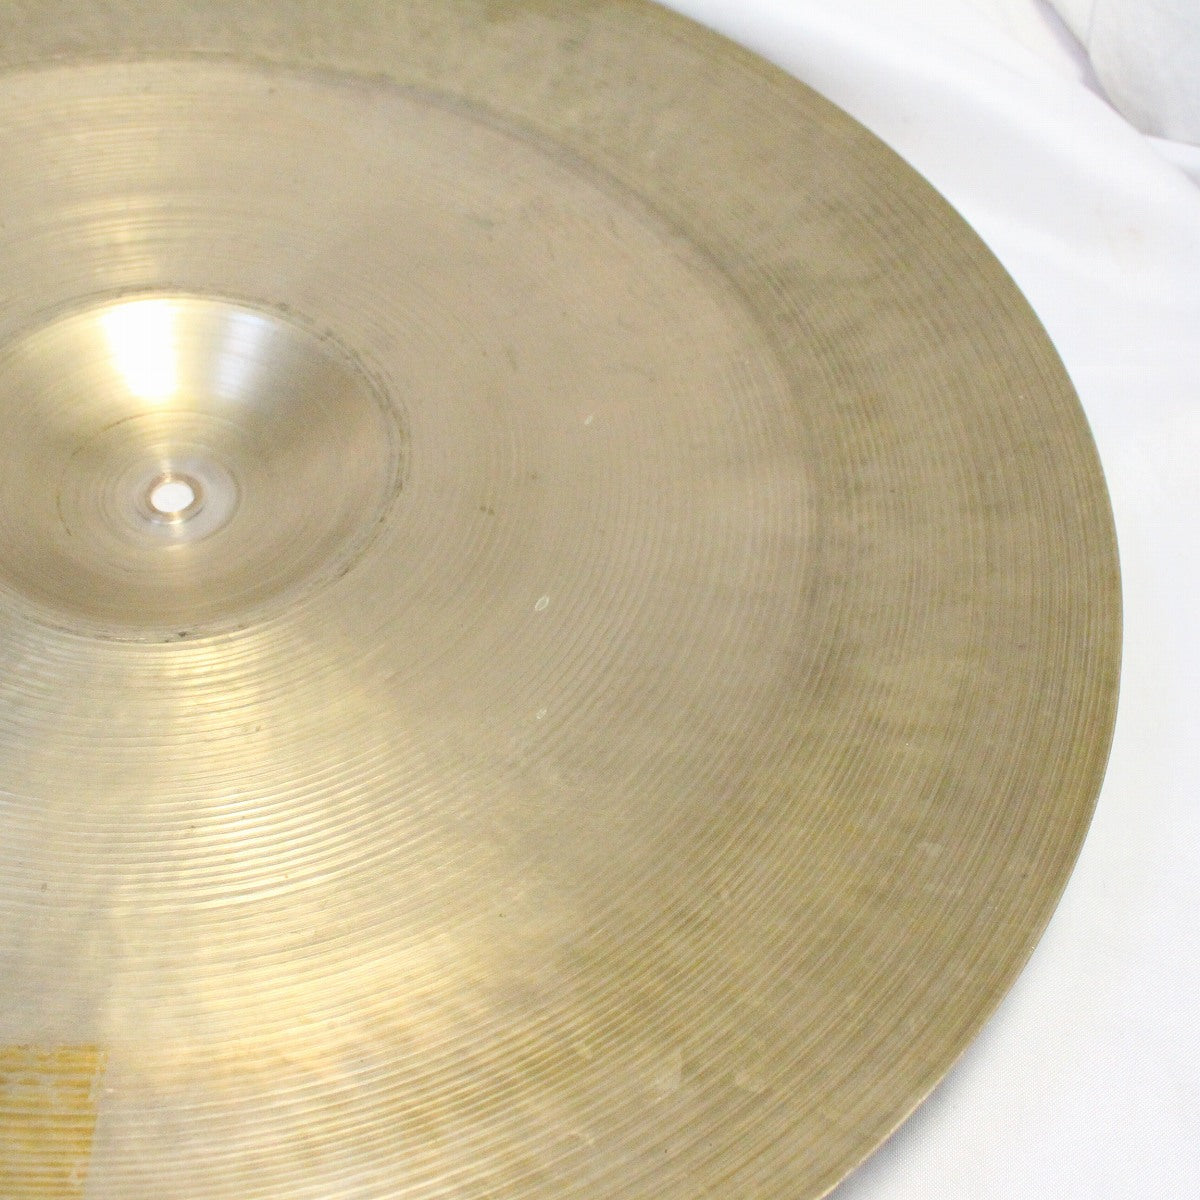 USED ZILDJIAN / mid50s A Large Stamp 22" RIDE 2506g 50s Old A Zildjian Ride Cymbal [08]